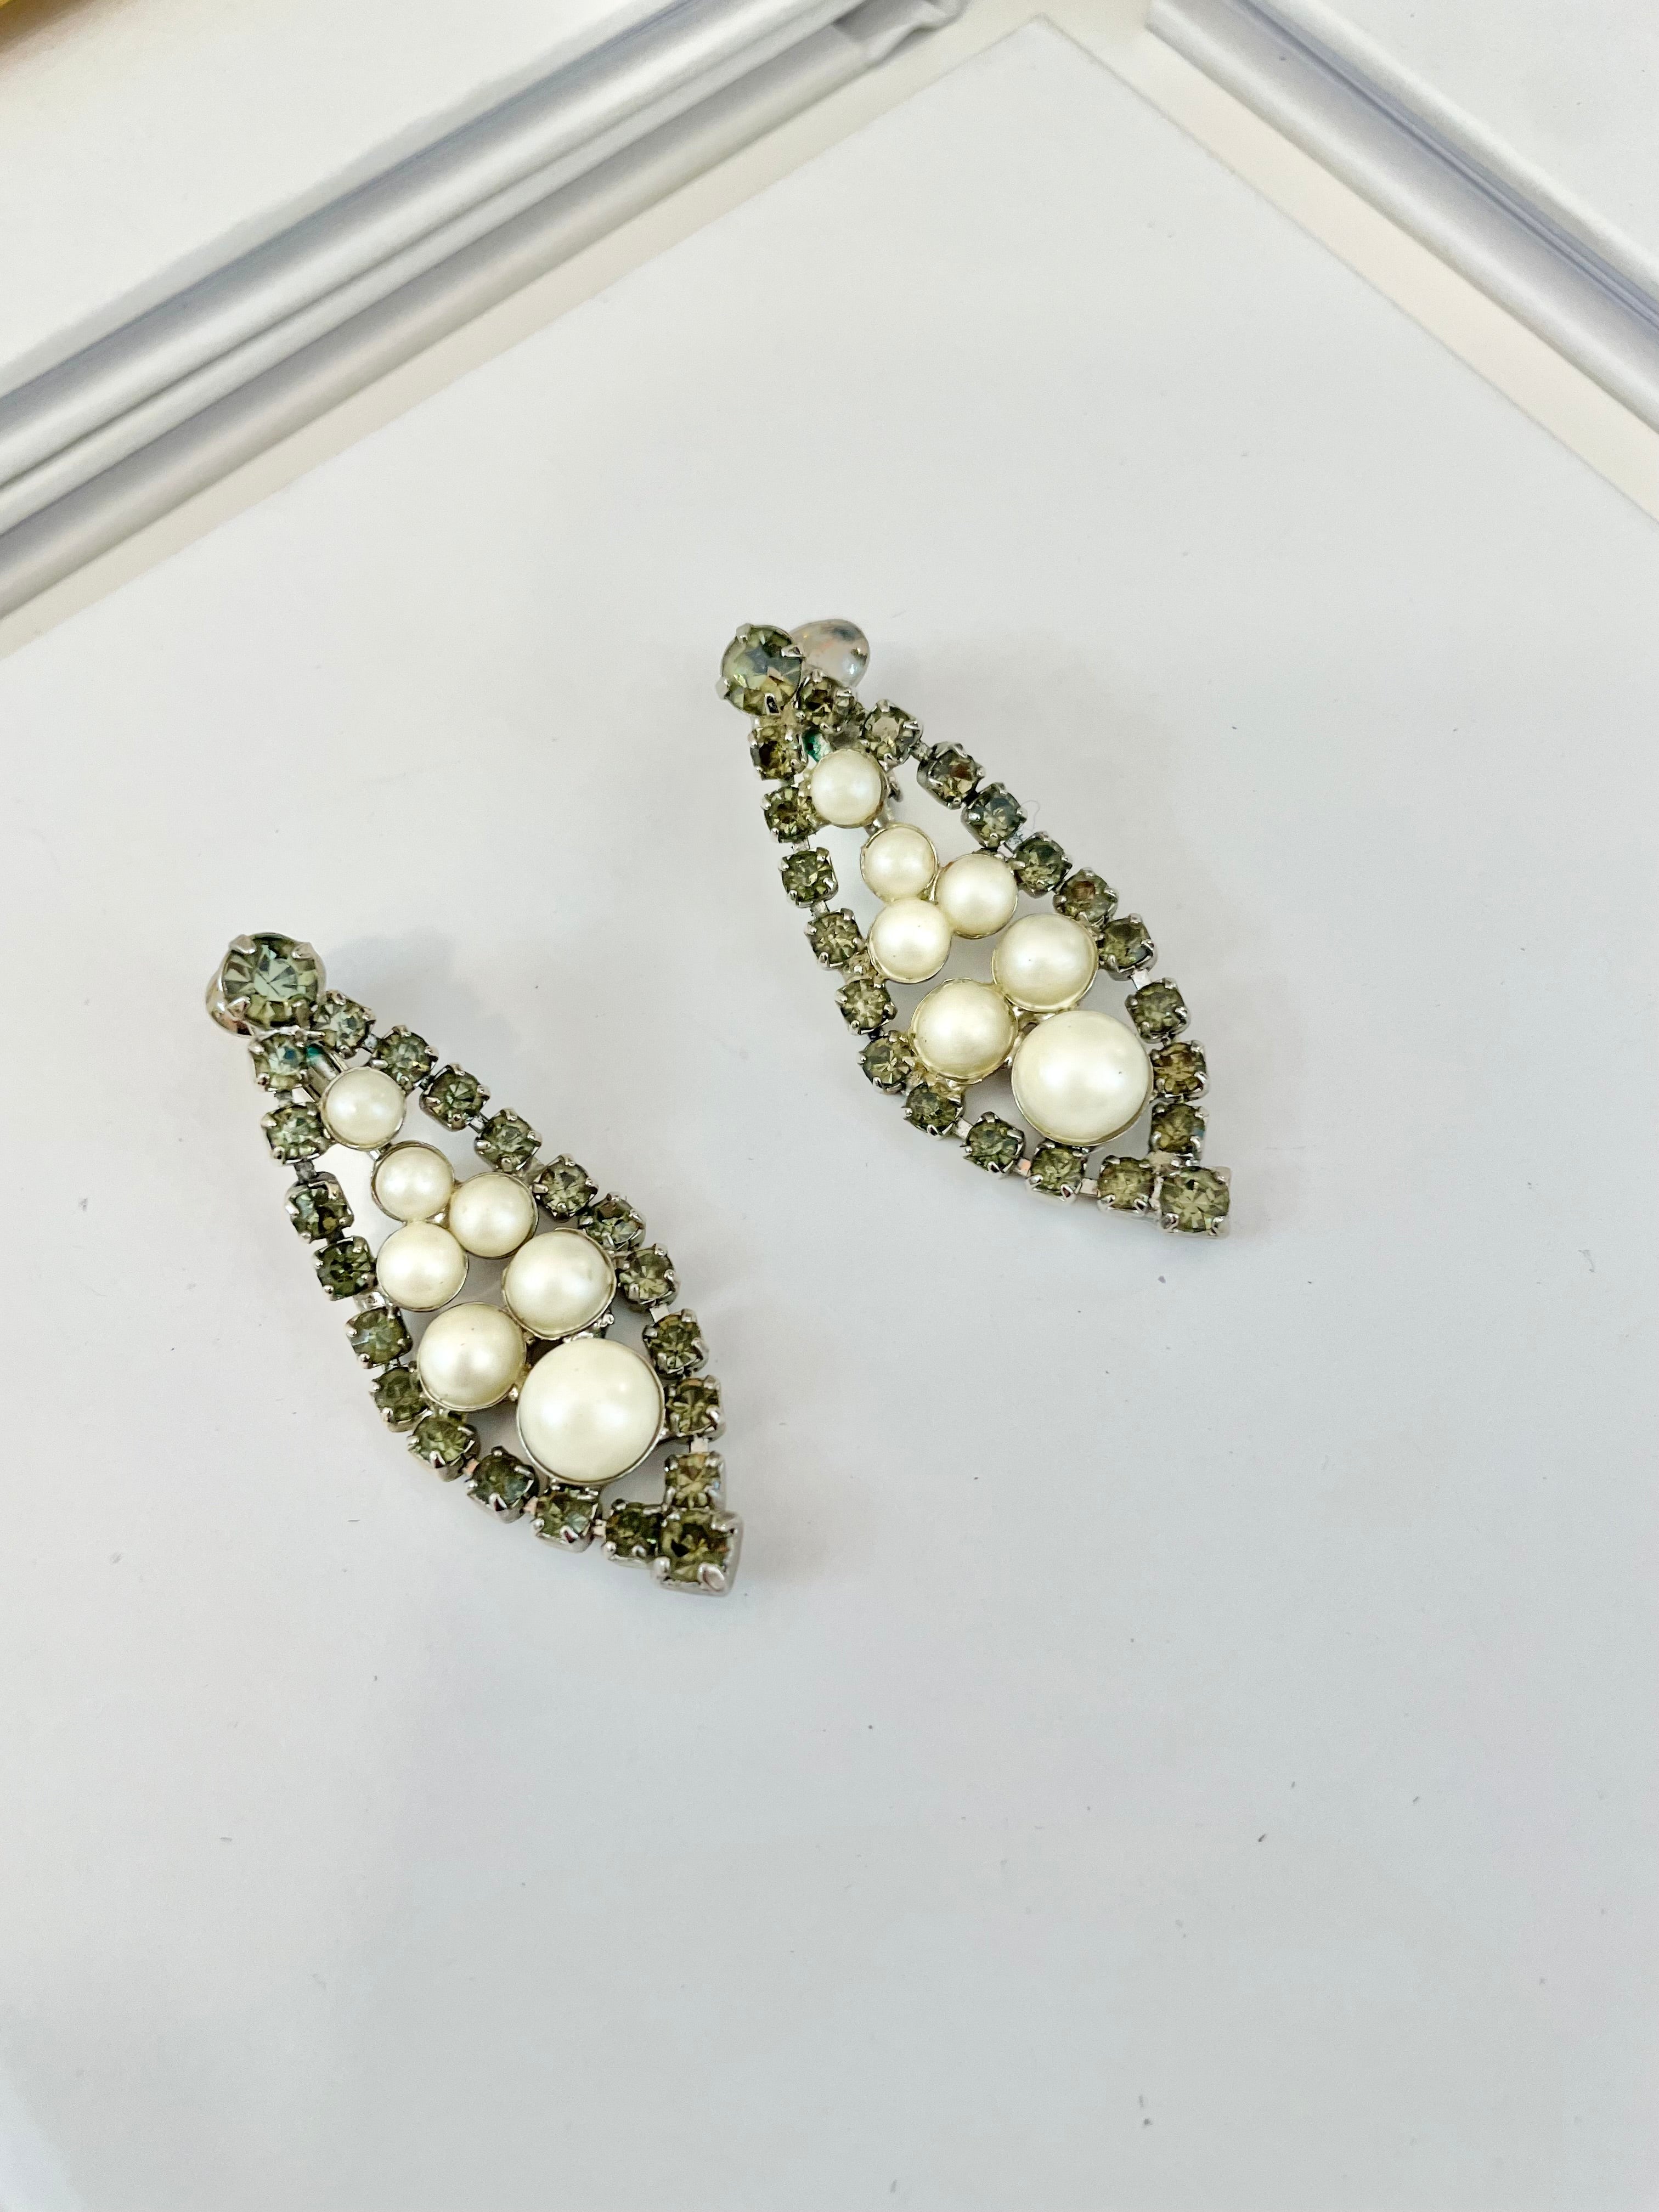 Isn't she charming... the lady loves a pearl drop earring like these! so elegant